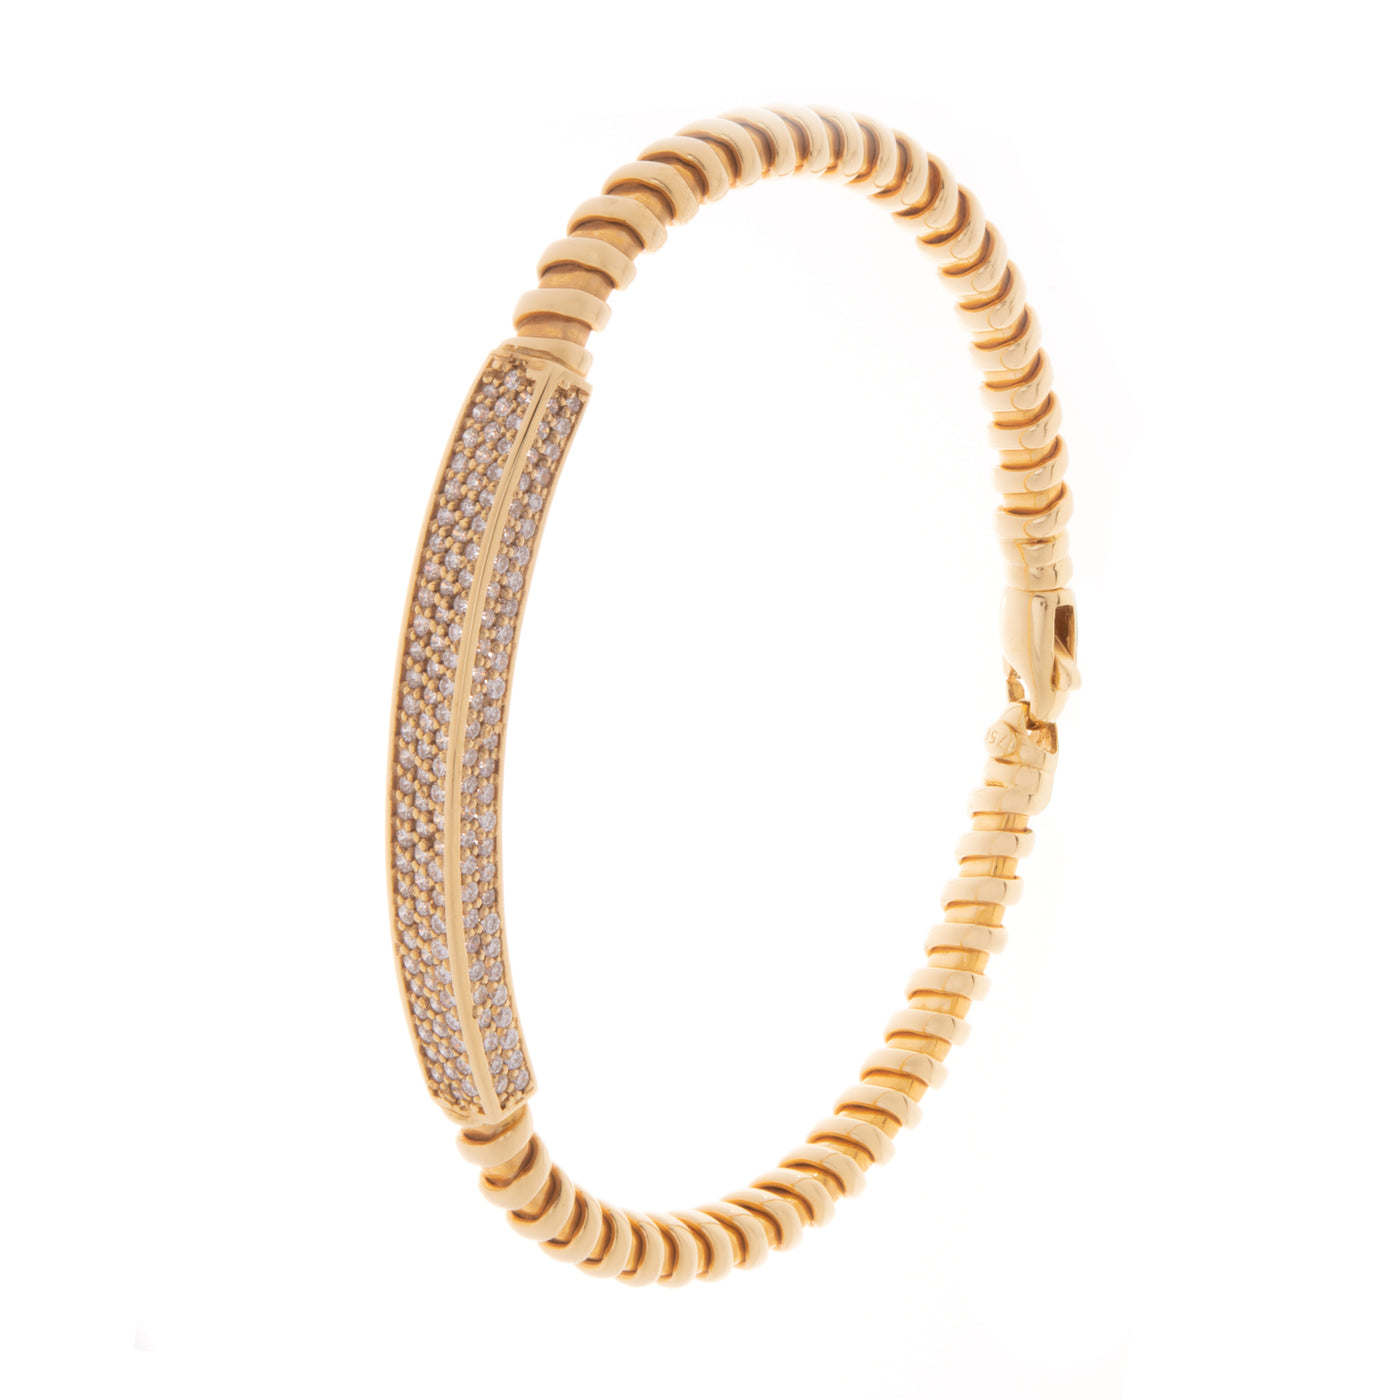 Soit Belle Yellow Twisted Gold Diamond Bangle: Elegance in Twisted Gold and Sparkling Diamonds.